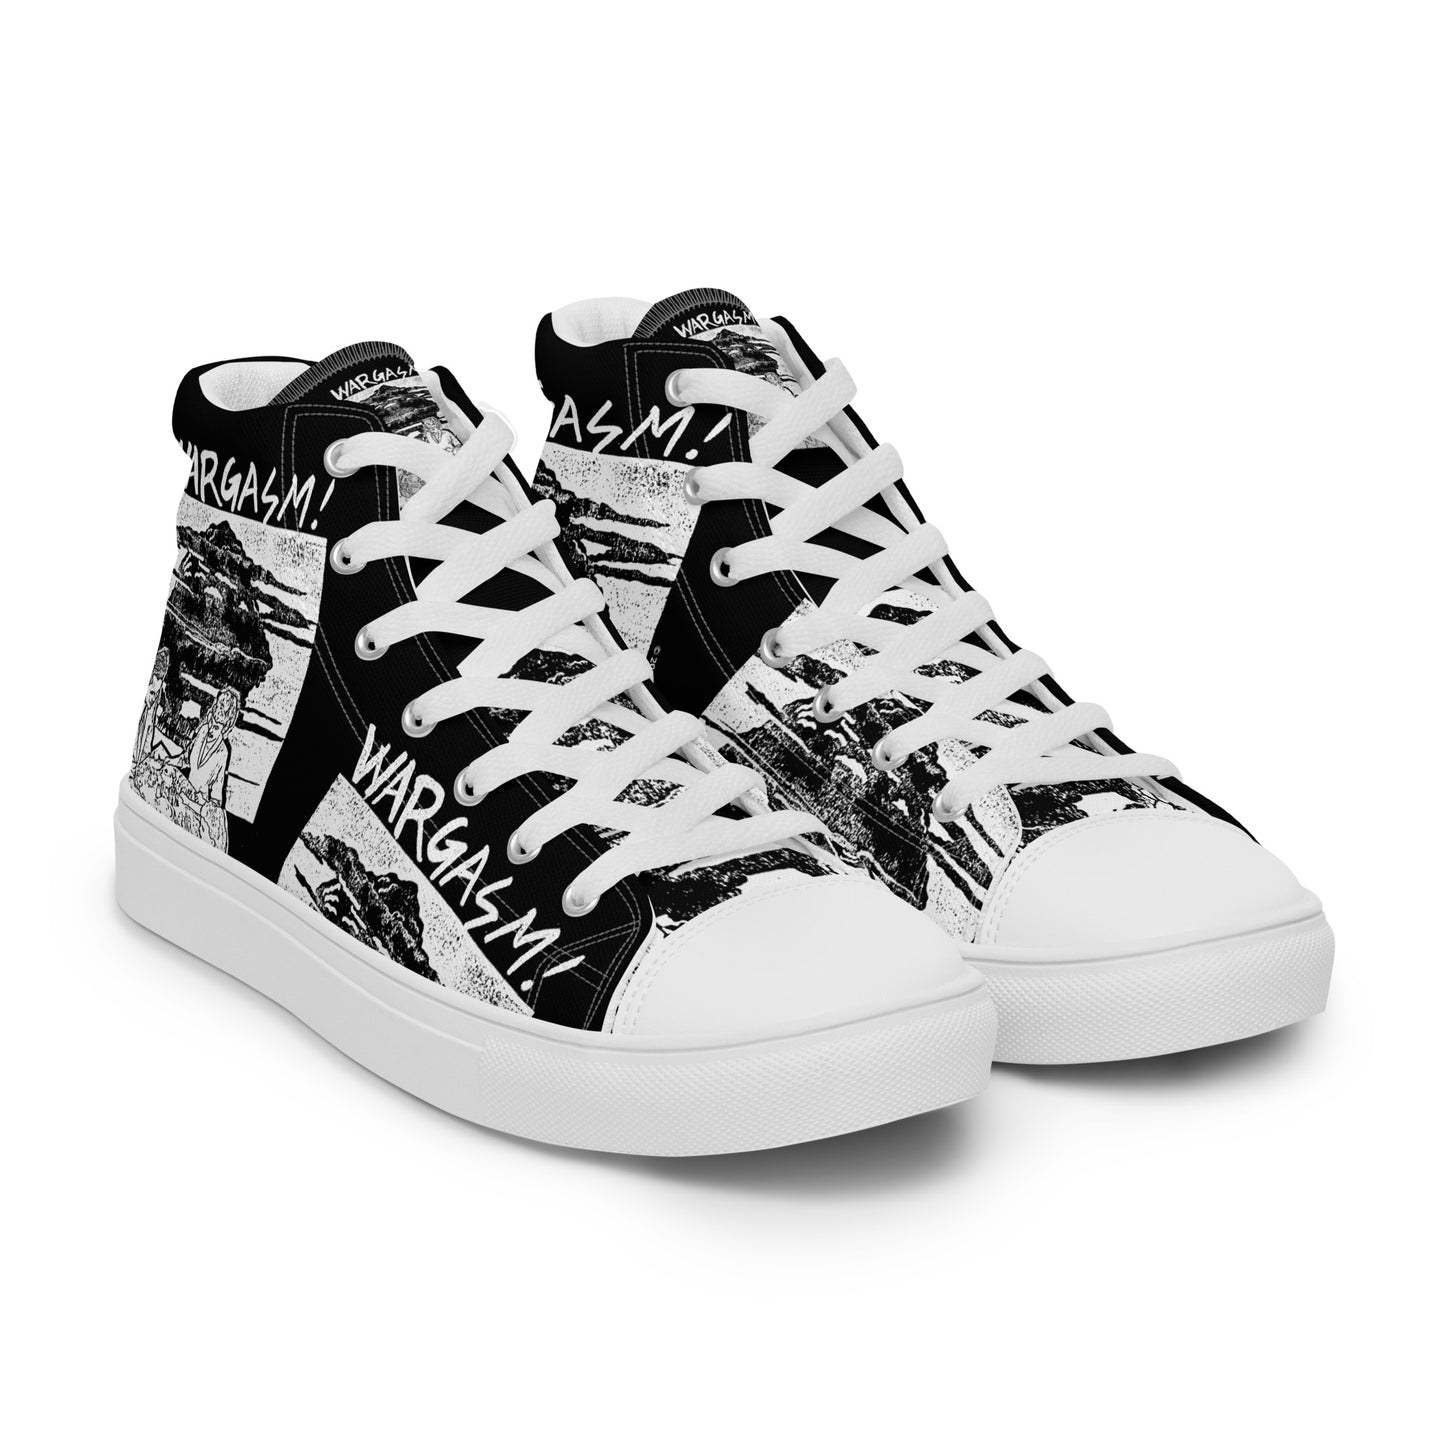 Winston Smith "Wargasm!" Women’s high top canvas shoes